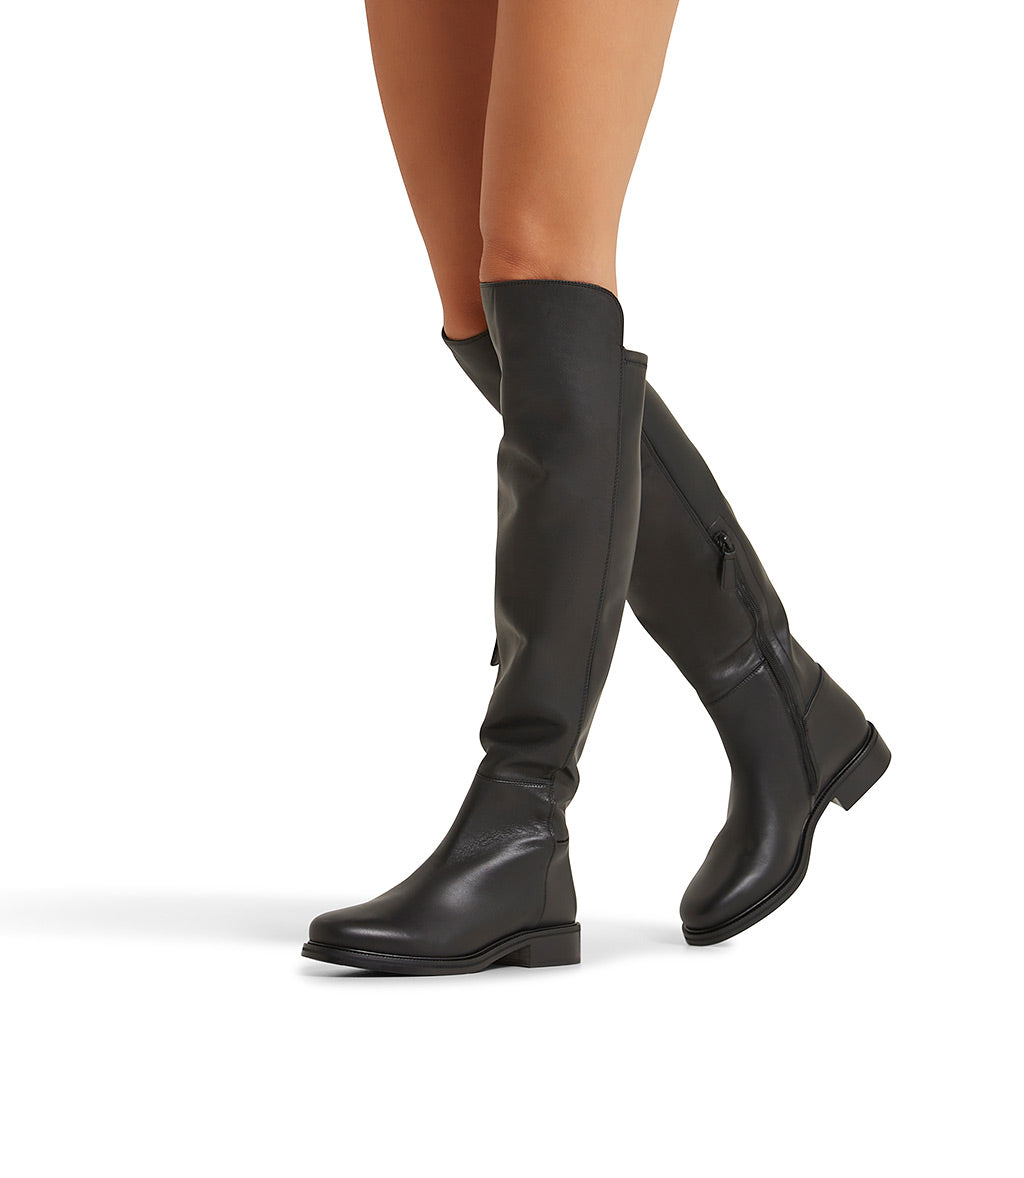 Black nappa leather over-the-knee boots